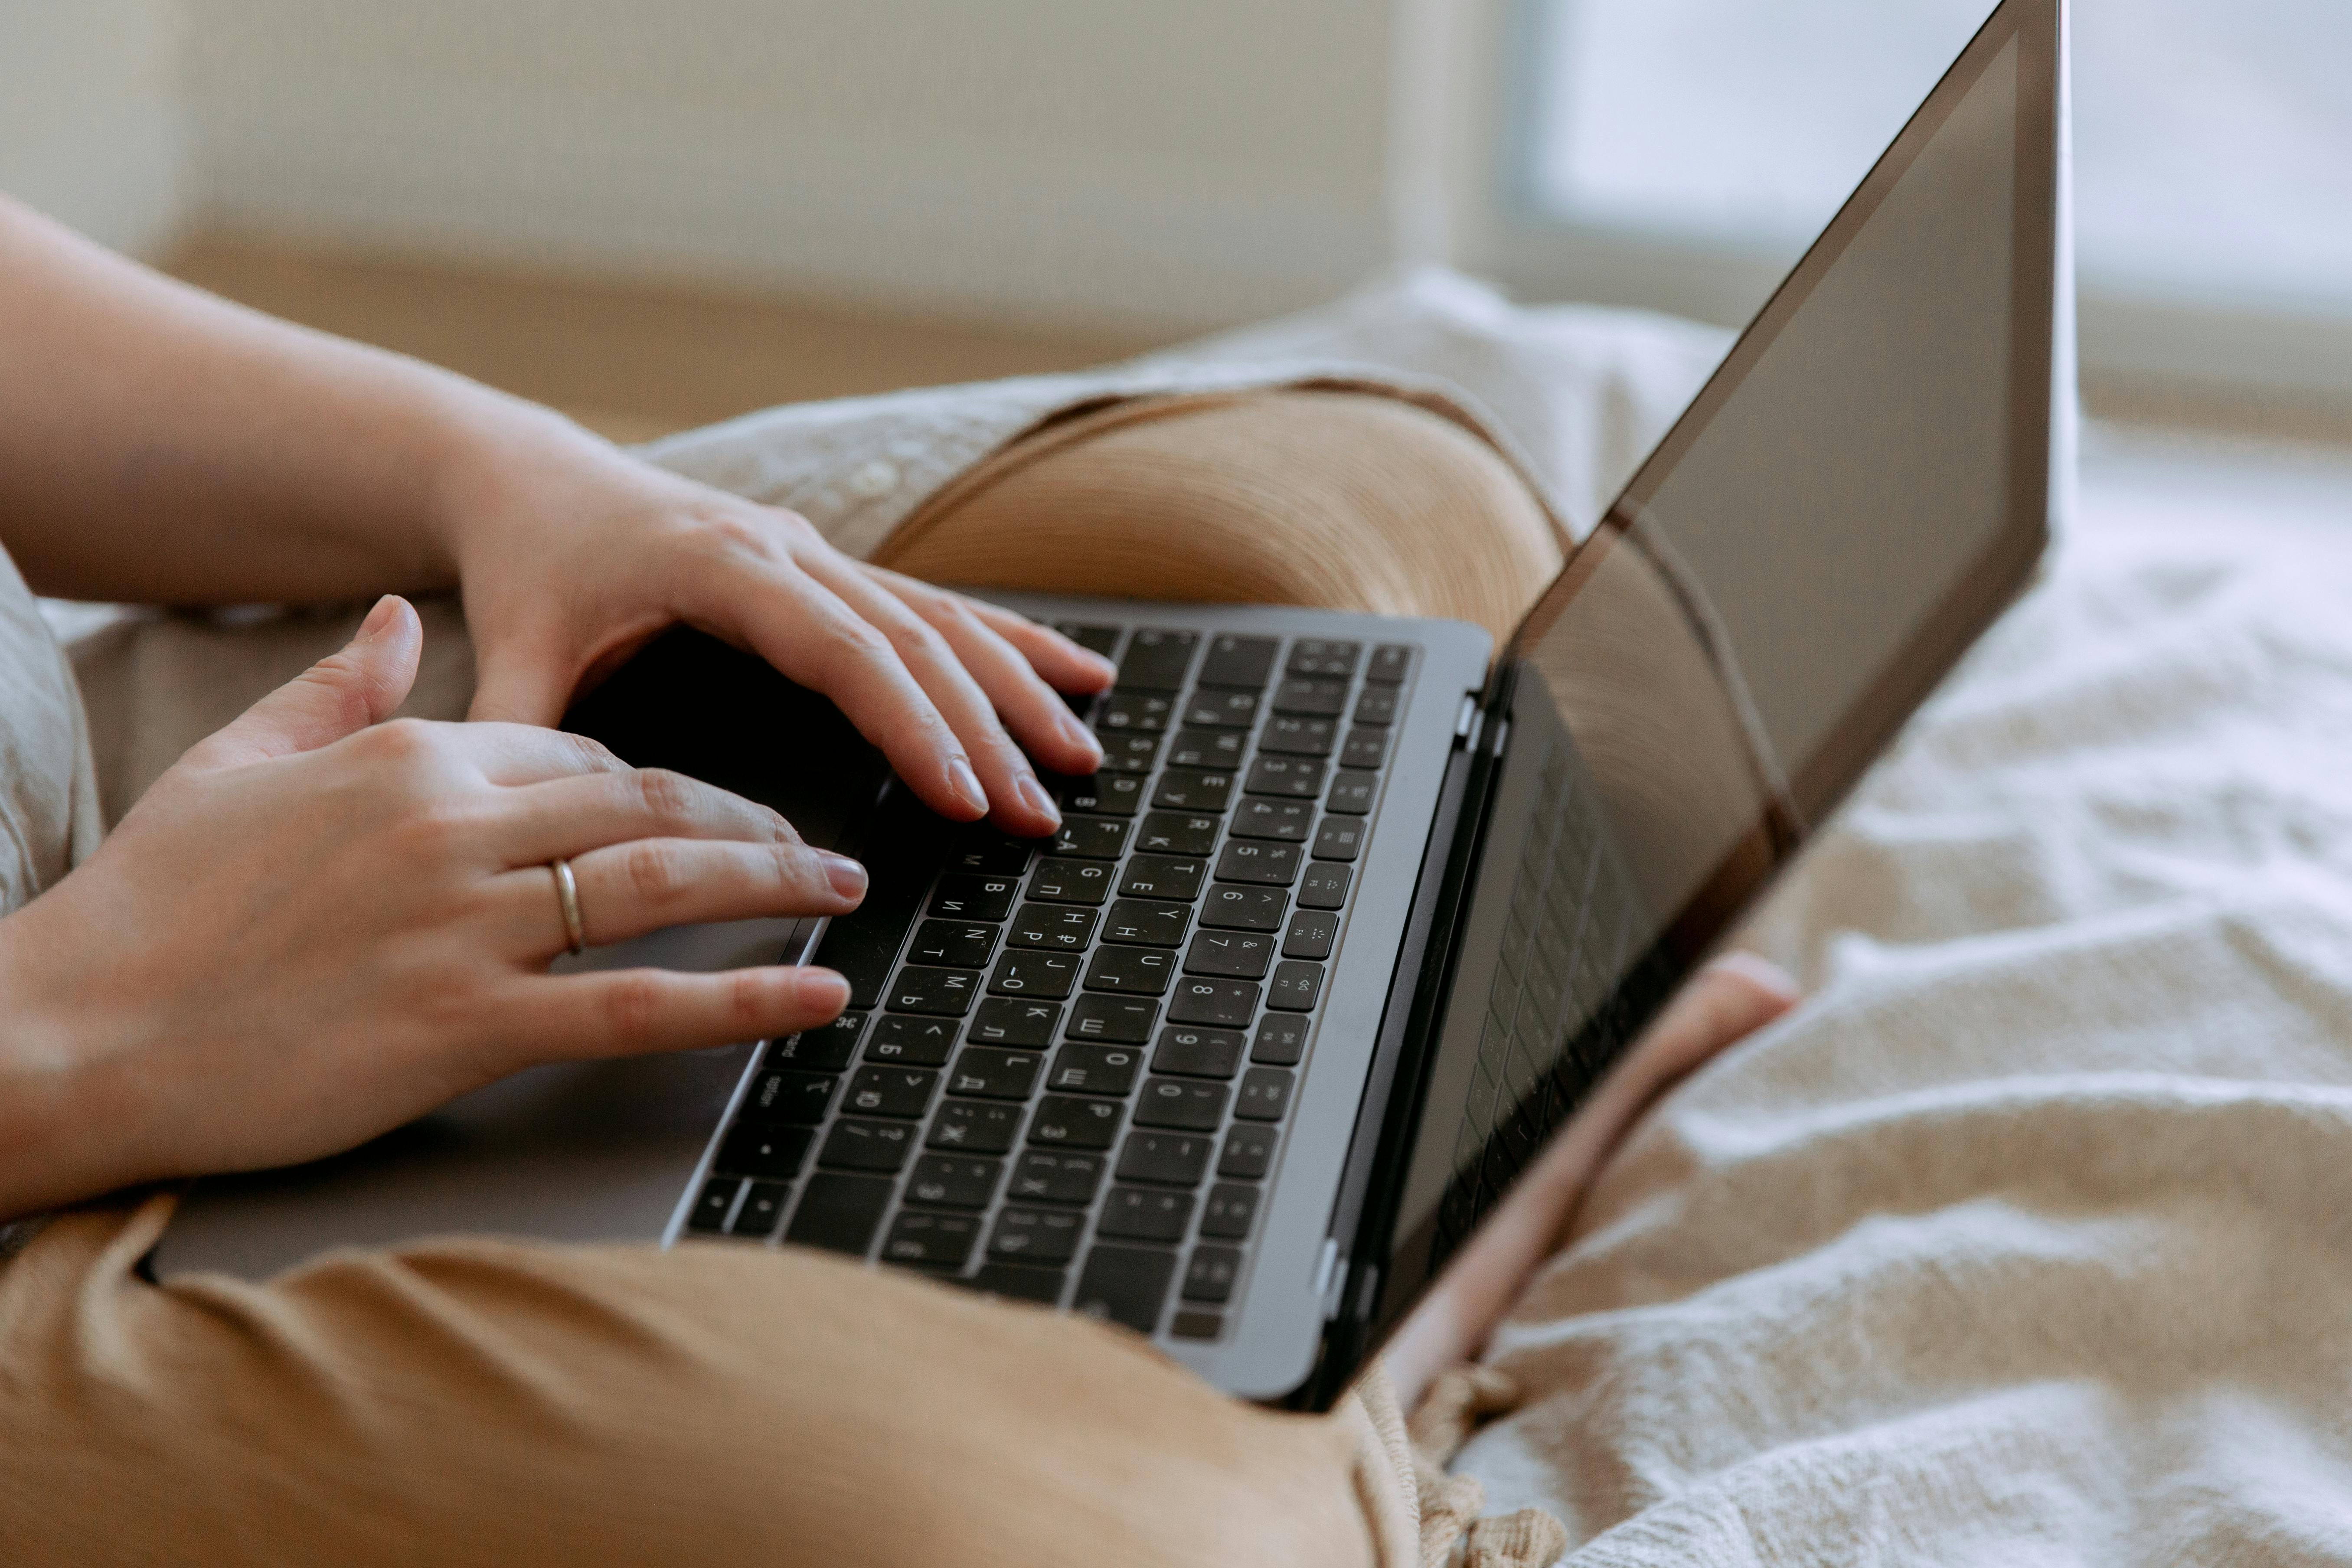 A woman's hands texting something on a laptop | Source: Pexels